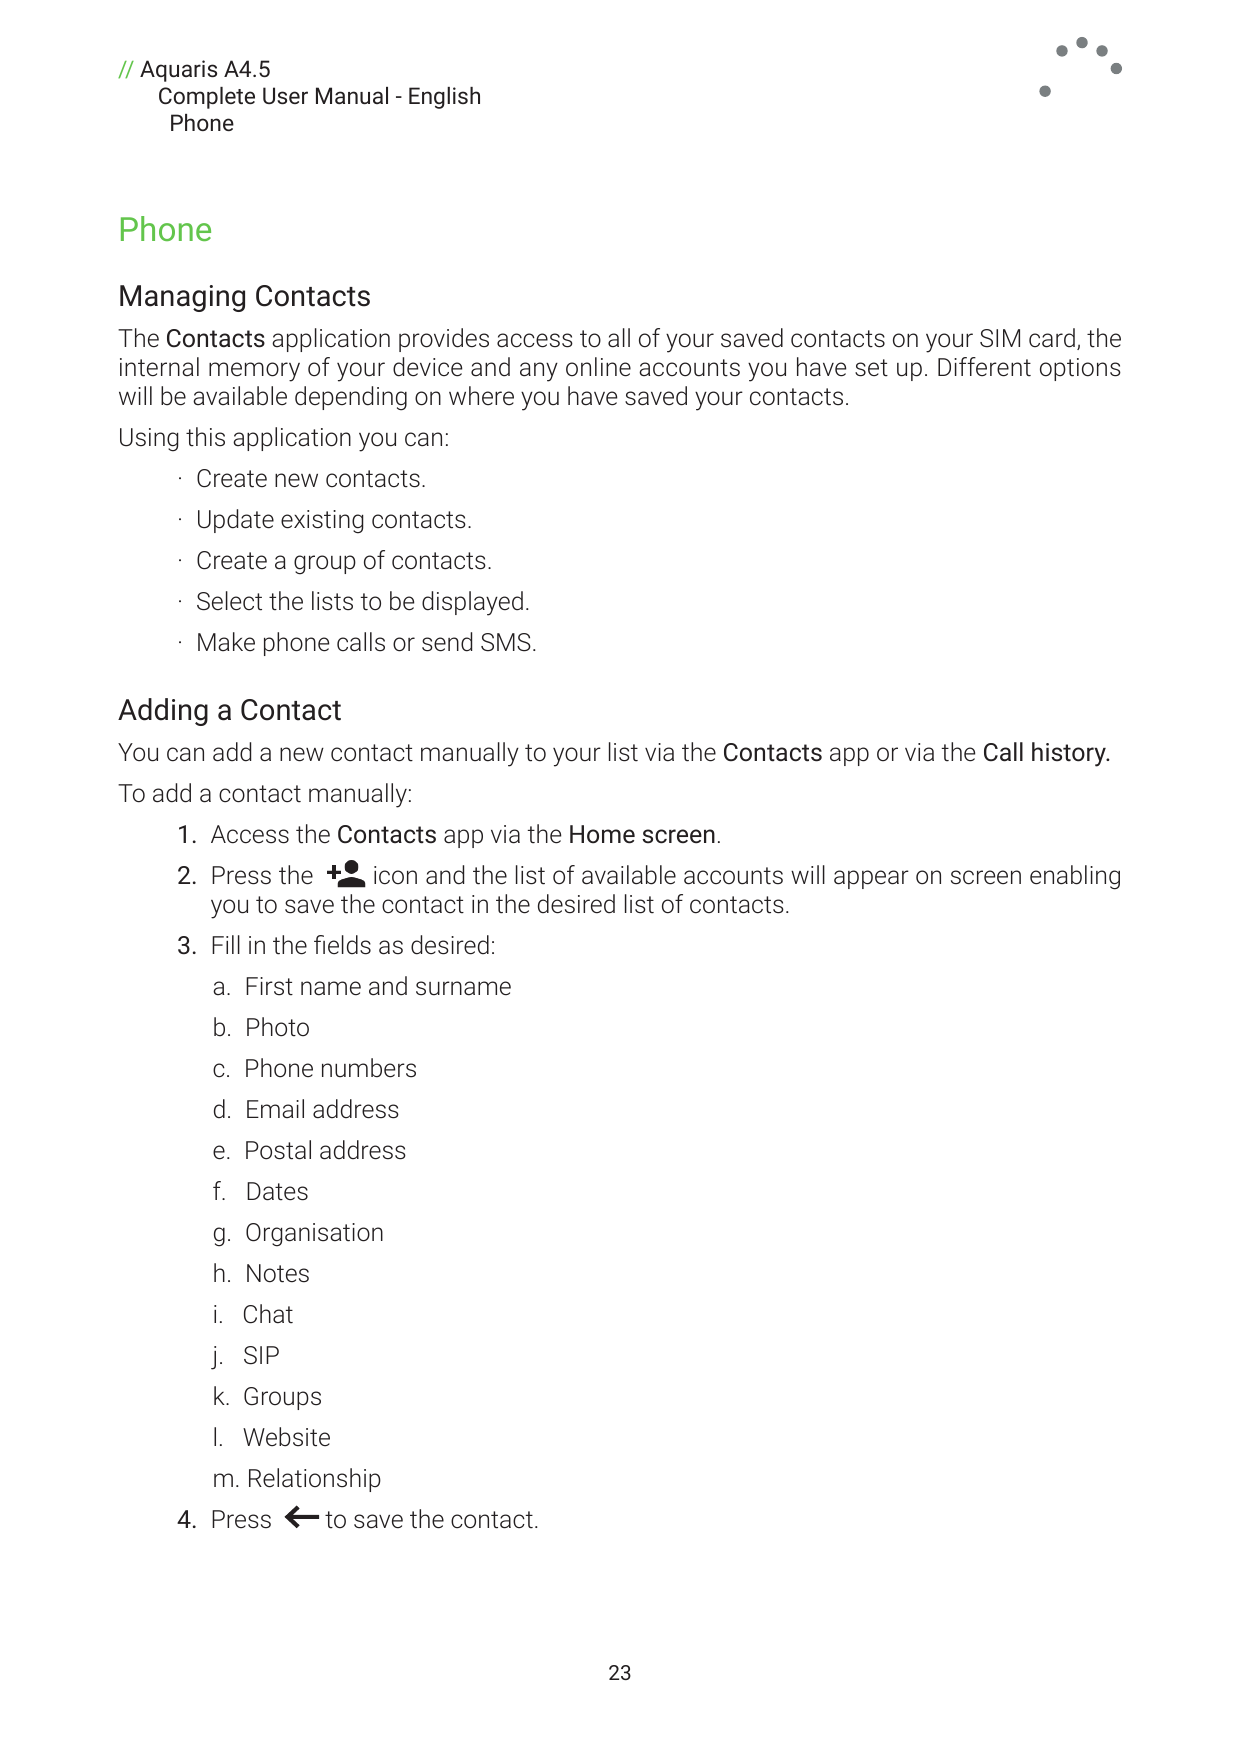 // Aquaris A4.5Complete User Manual - EnglishPhonePhoneManaging ContactsThe Contacts application provides access to all of your 